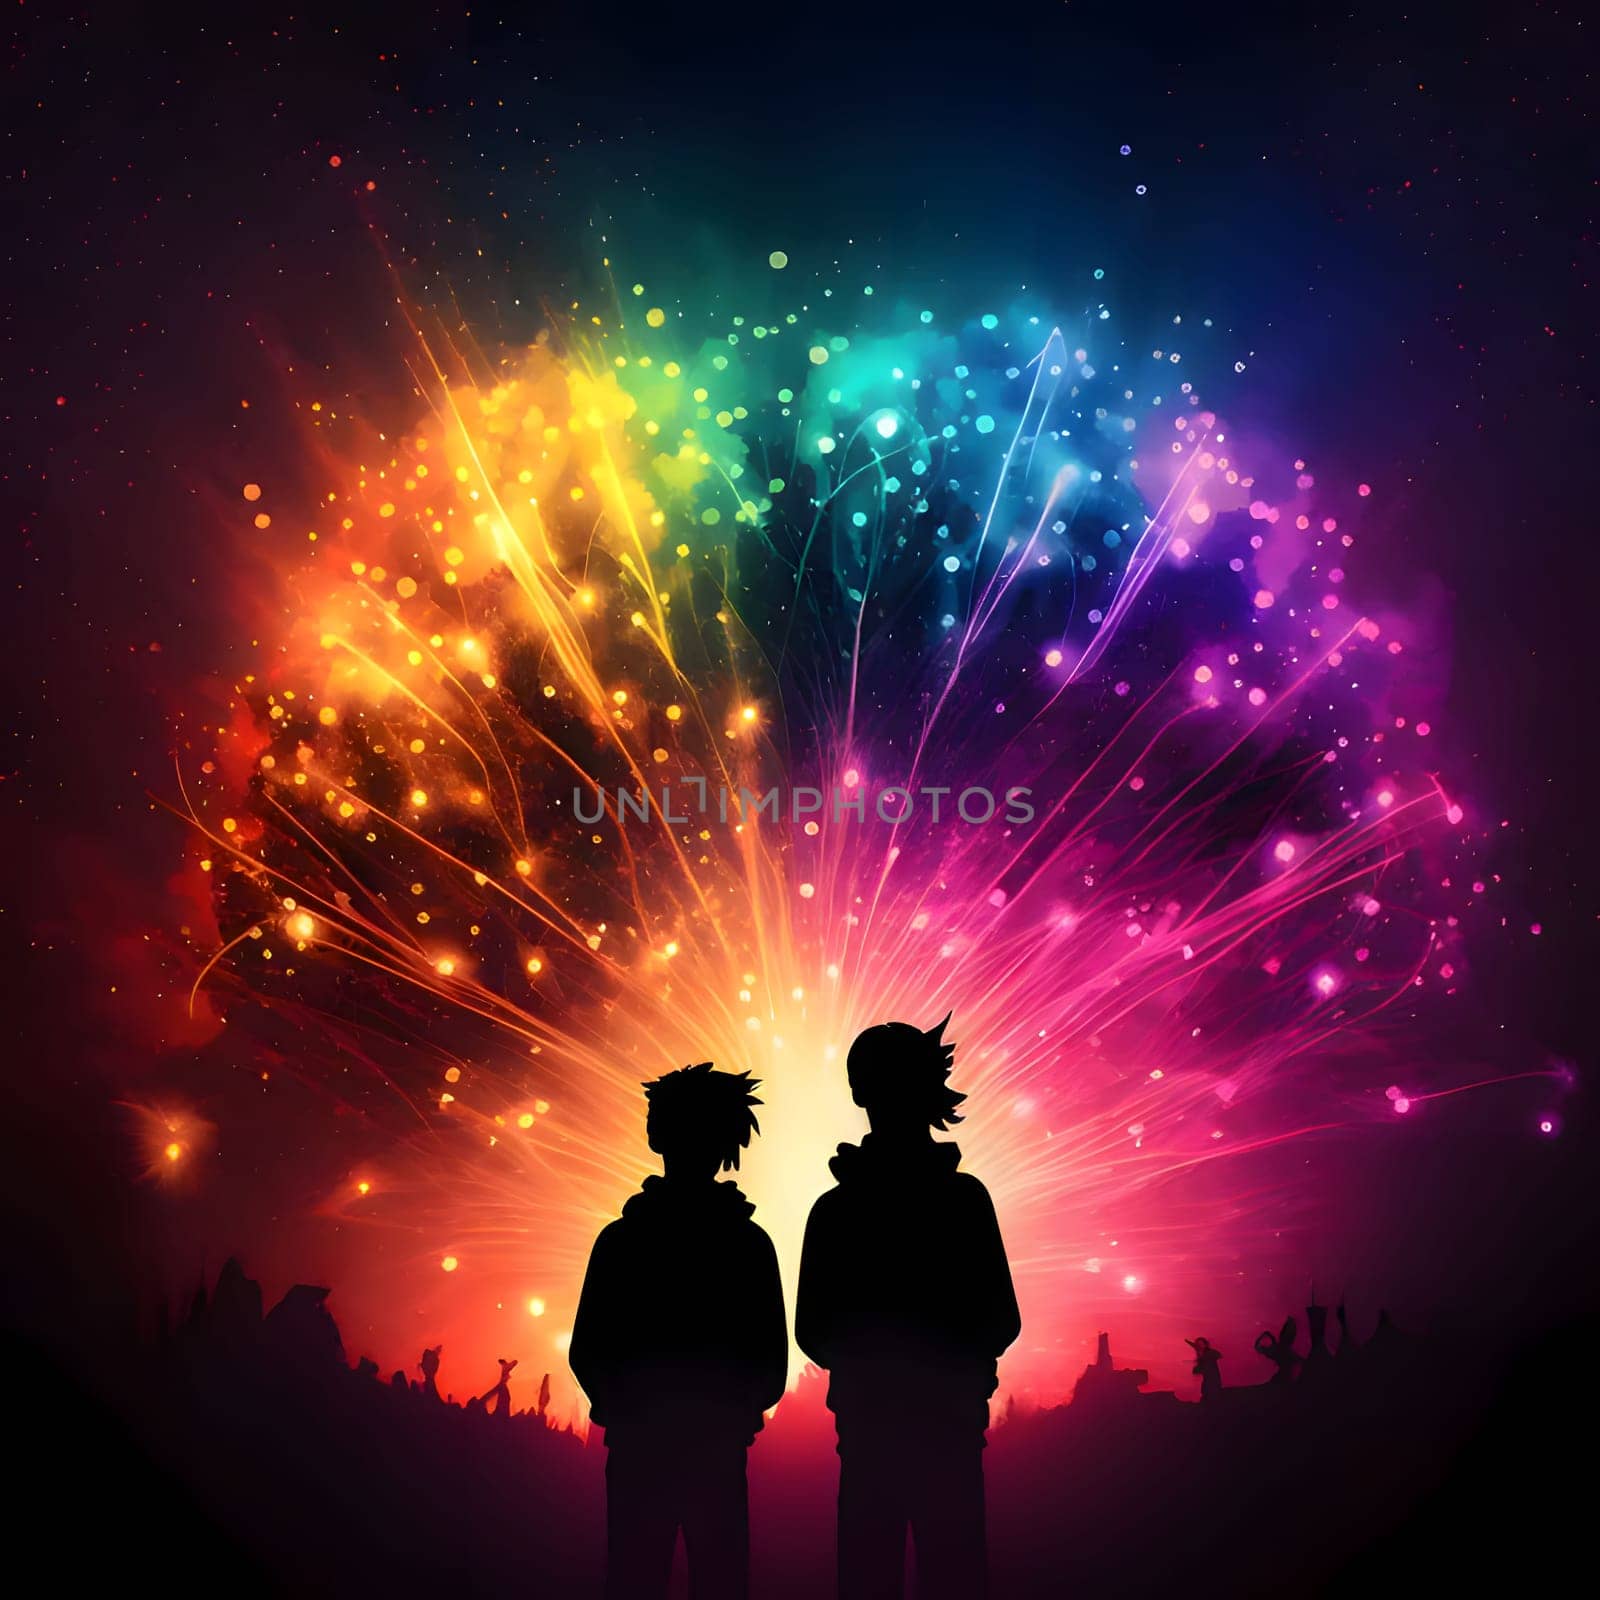 Silhouettes of two people watching a show of colorful fireworks in the sky. New Year's fun and festivities. A time of celebration and resolutions.